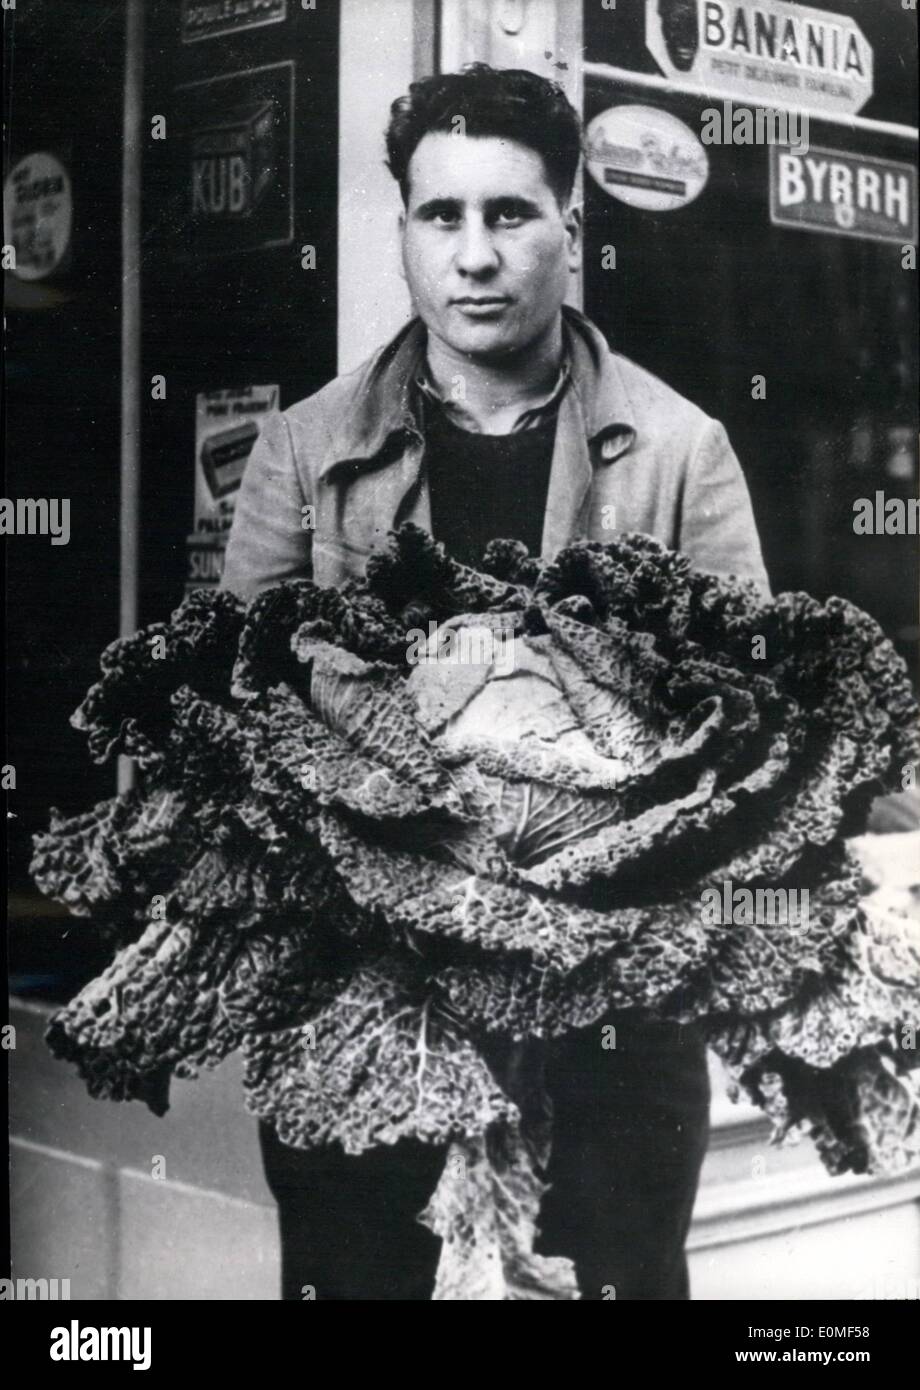 Dec. 12, 1954 - What a Cabbage!. This giant cabbage was grown by French farmer at Doullens, near Amiens. It Weighs 18 lbs. and measures 1 meter 60 in circumference. Stock Photo